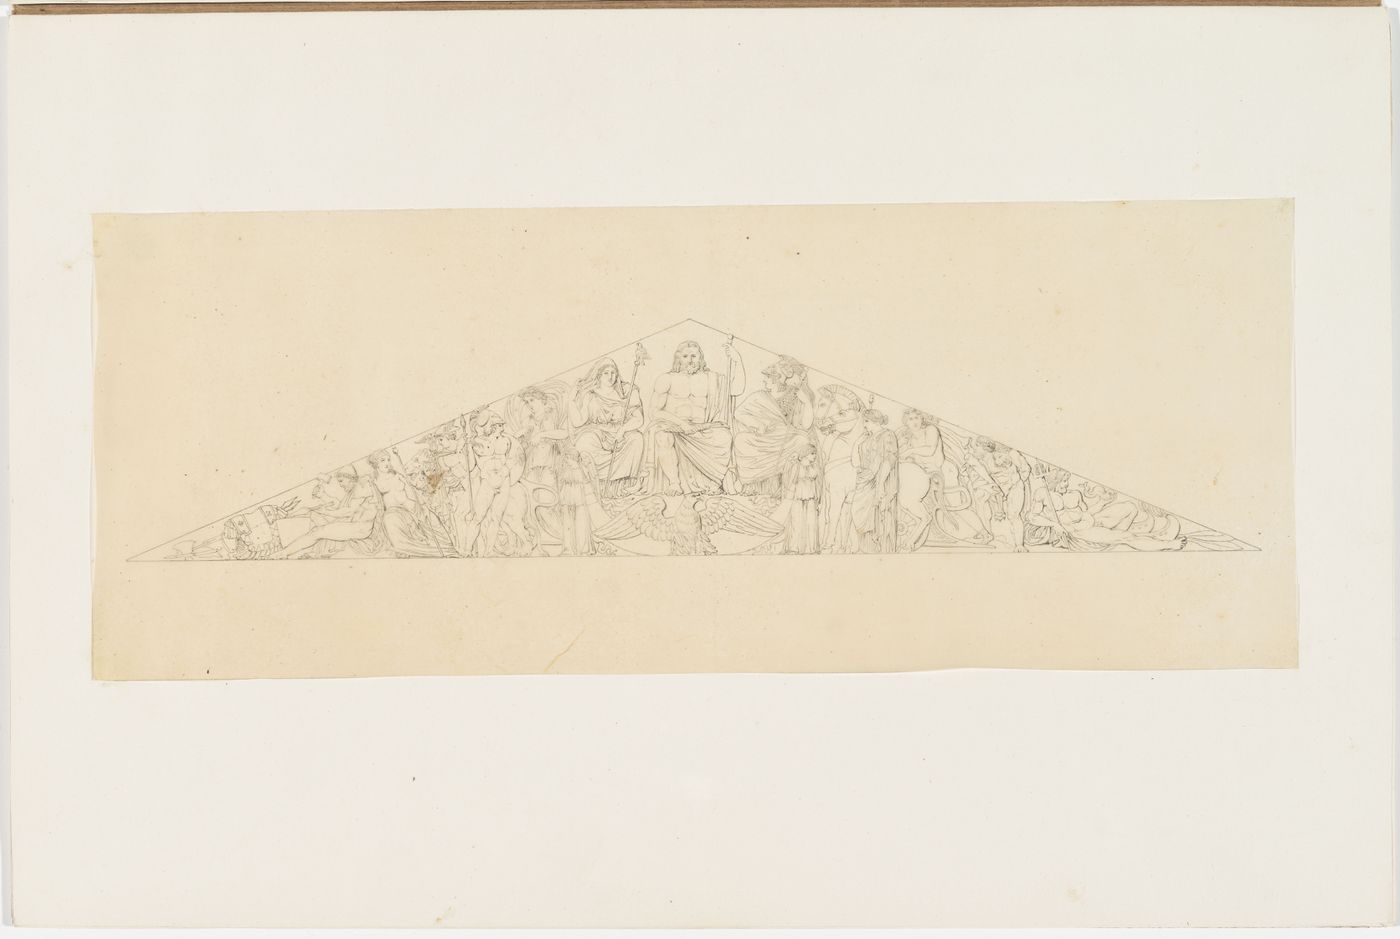 Drawing of a nineteenth century pediment, including sculptures of Jupiter, Juno, Neptune, Vulcan, Mercury, Herakles, and an imperial eagle